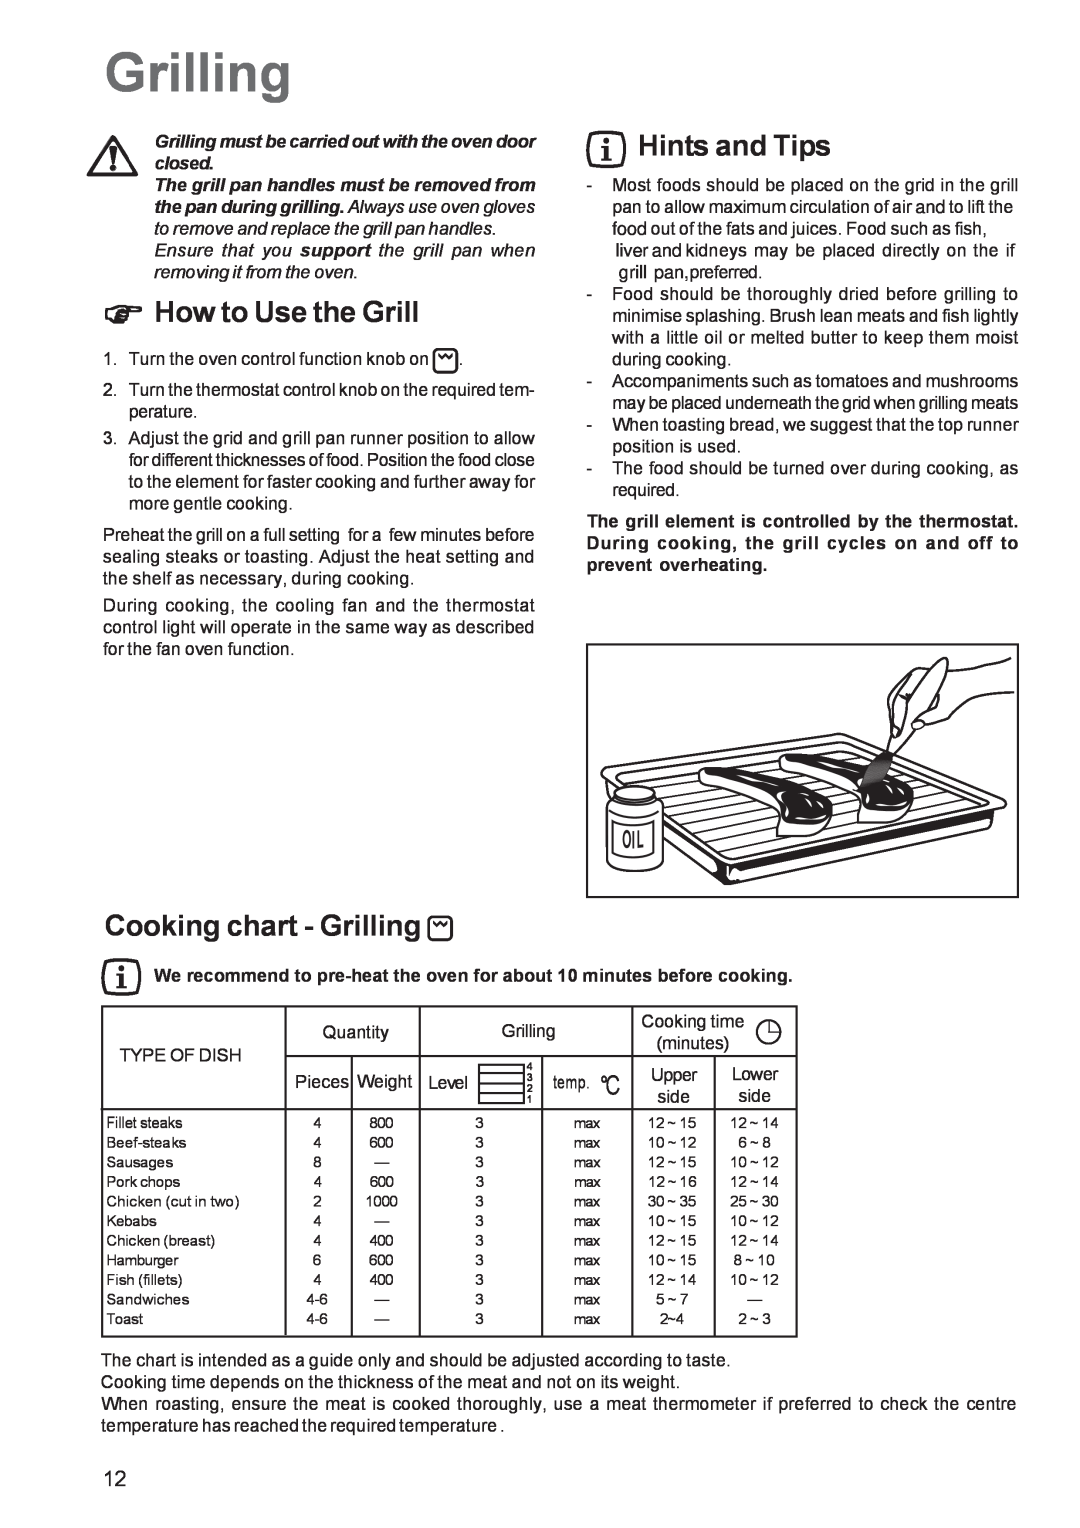 Zanussi ZBF 361 manual How to Use the Grill, Cooking chart - Grilling, Hints and Tips 